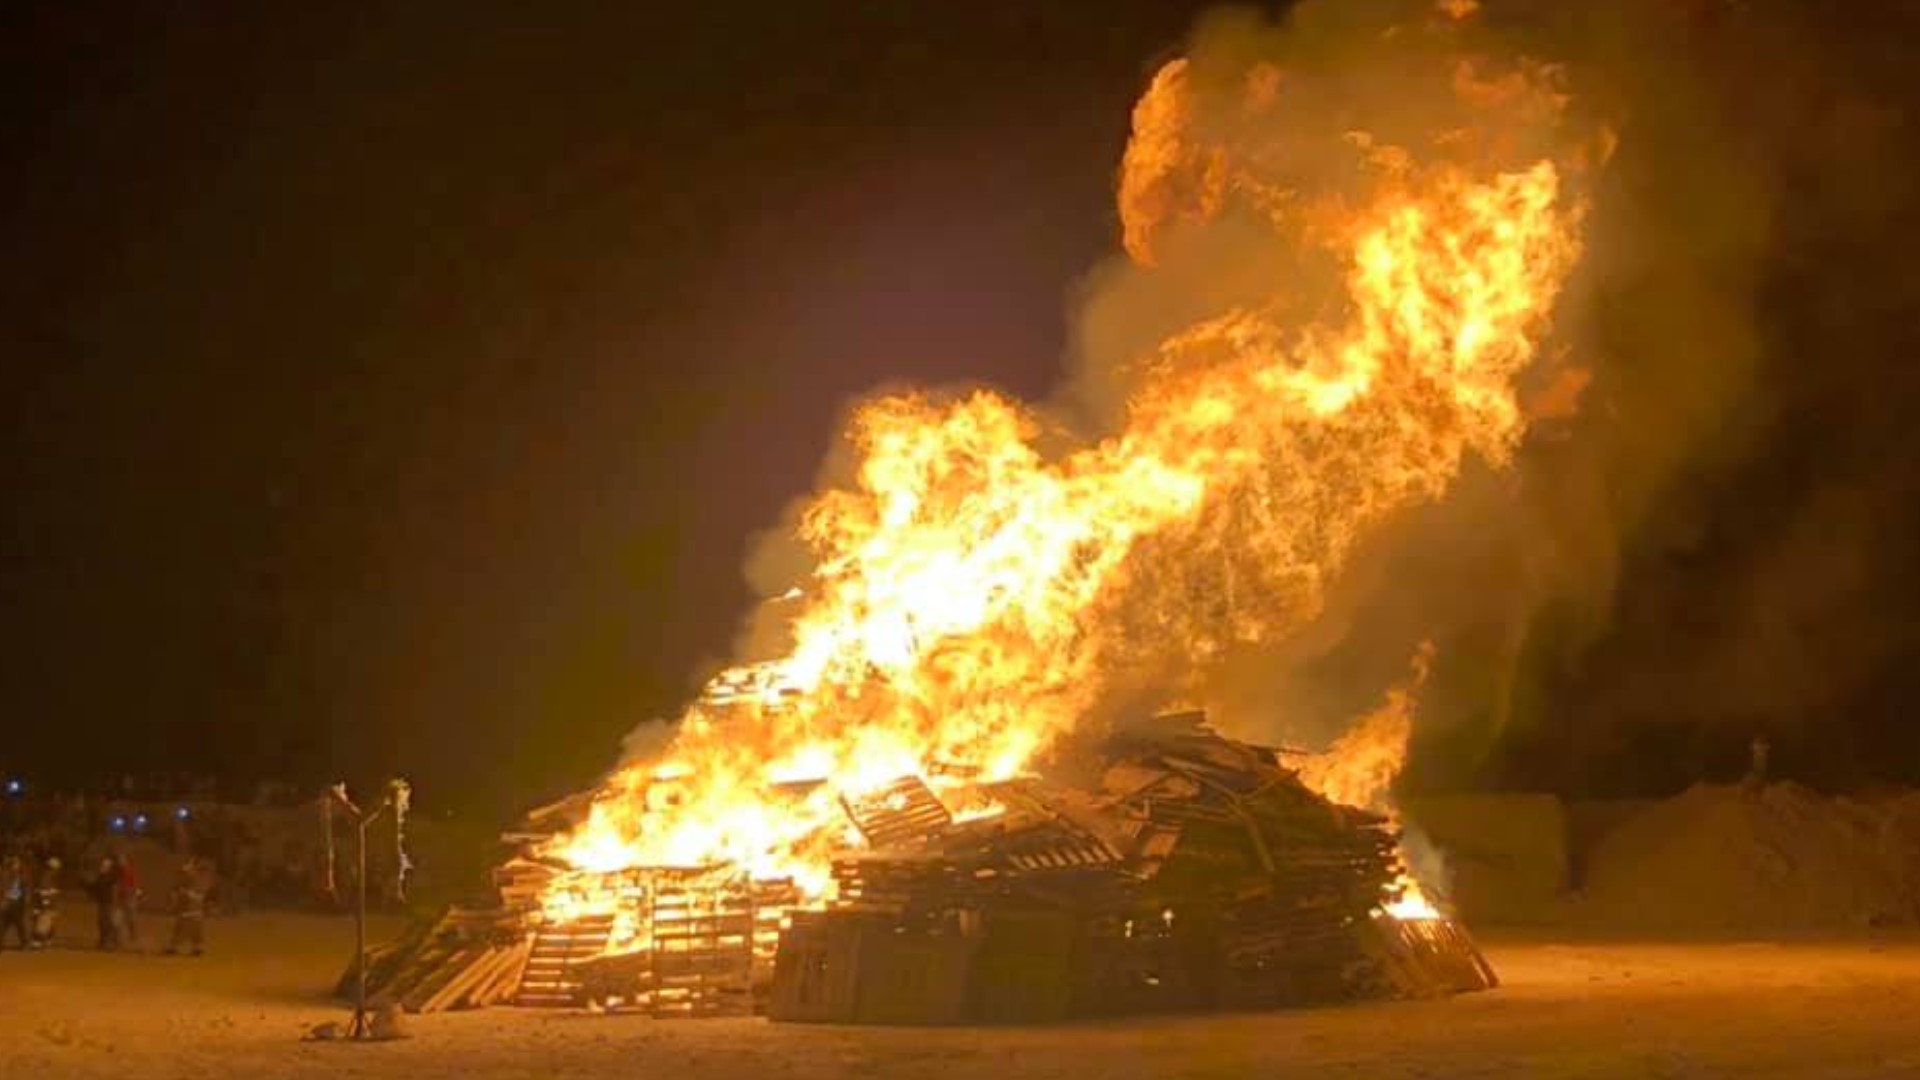 After 17 years without a big homecoming bonfire, Monahans High School decided to bring it back thanks to a community-wide effort.